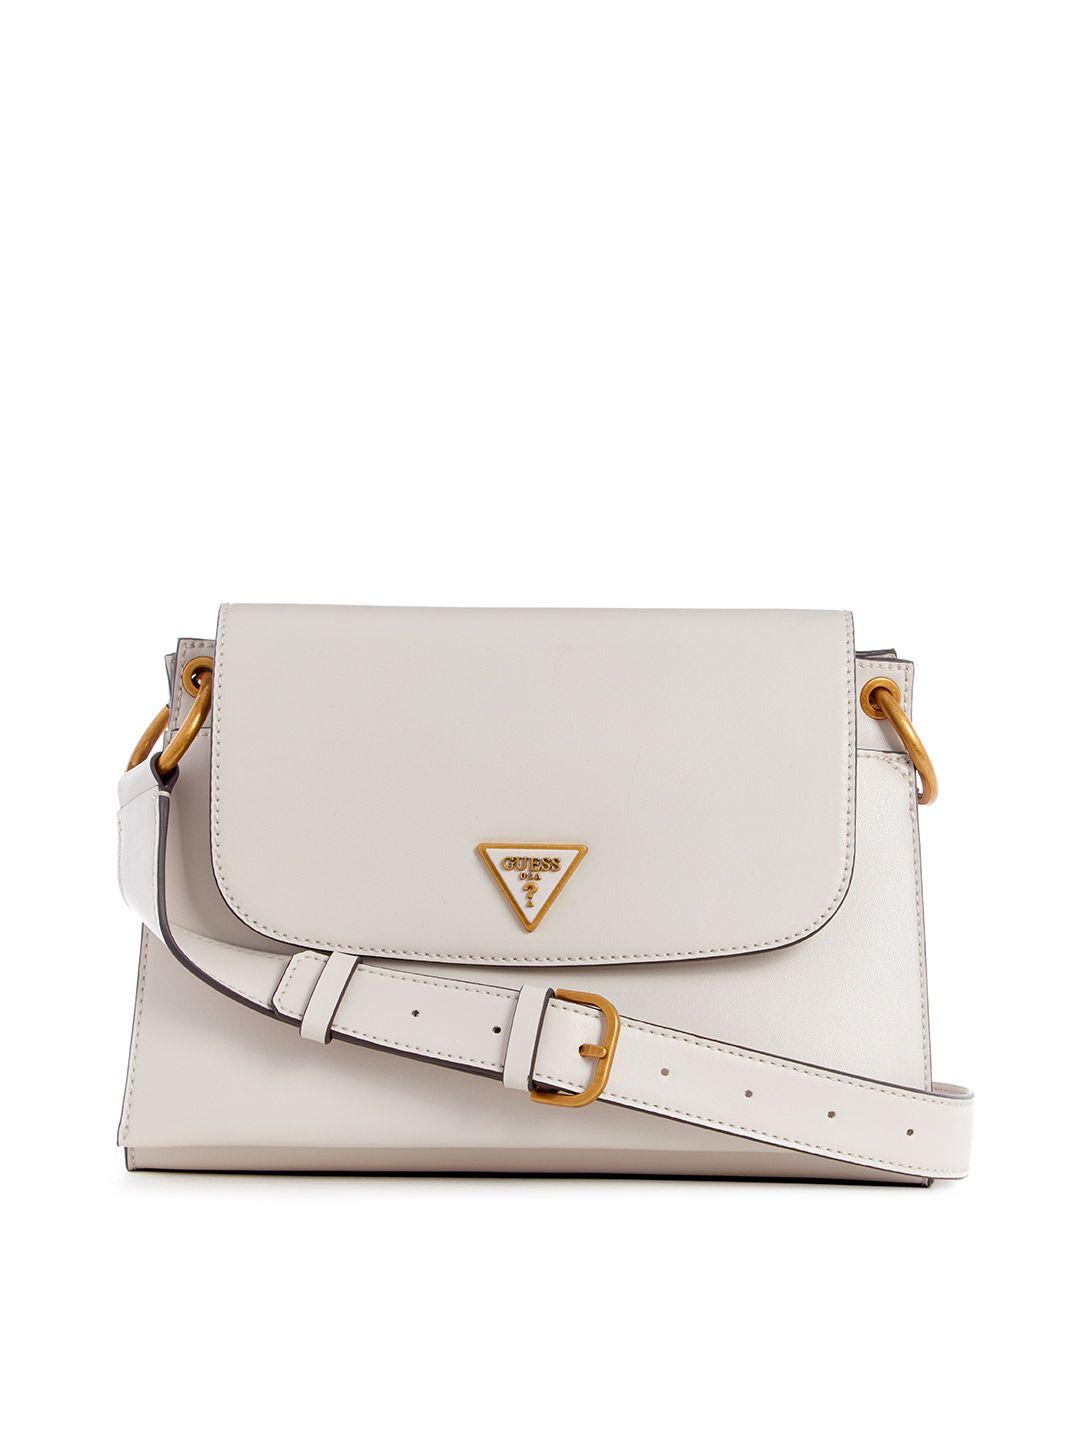 guess structured crossbody sling bag